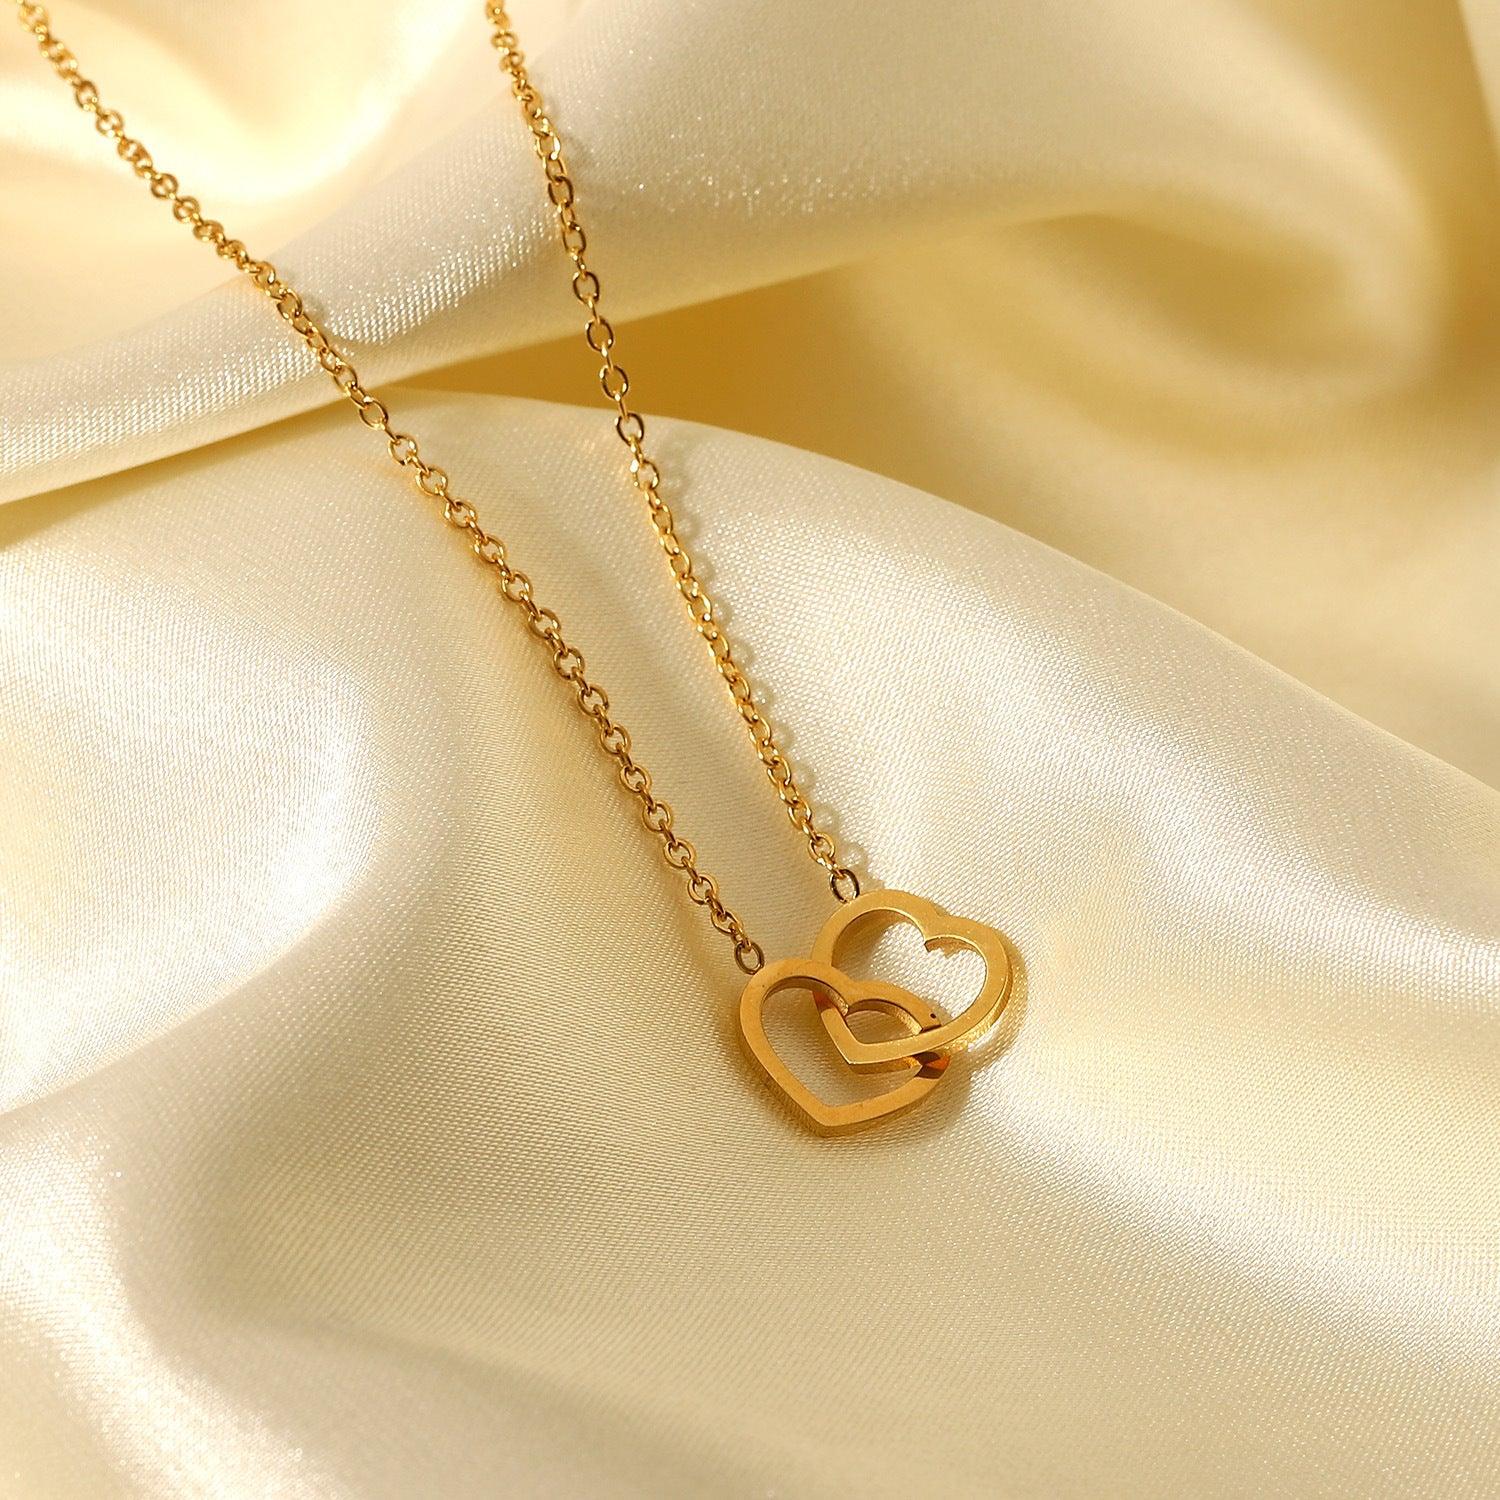 N37.Hot Sale 18K Gold Double Heart Necklace - Elle Royal Jewelry